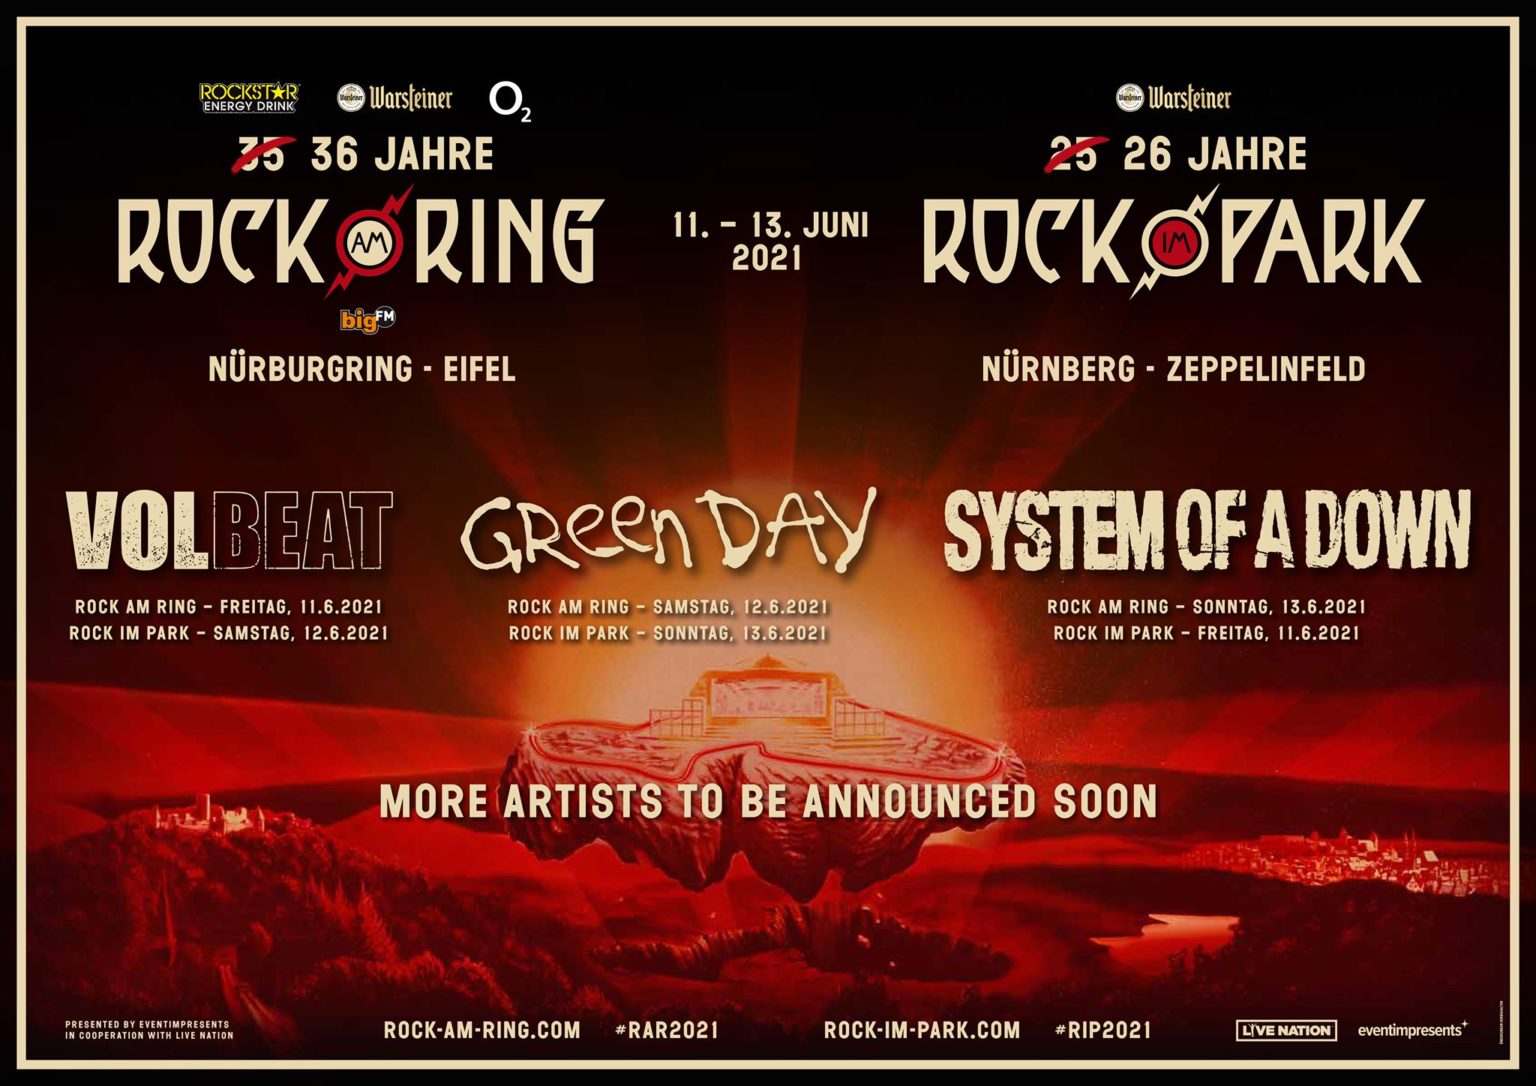 ROCK AM RING e ROCK IN PARK 2021: sempre headliner i VOLBEAT, GREEN DAY e SYSTEM OF A DOWN